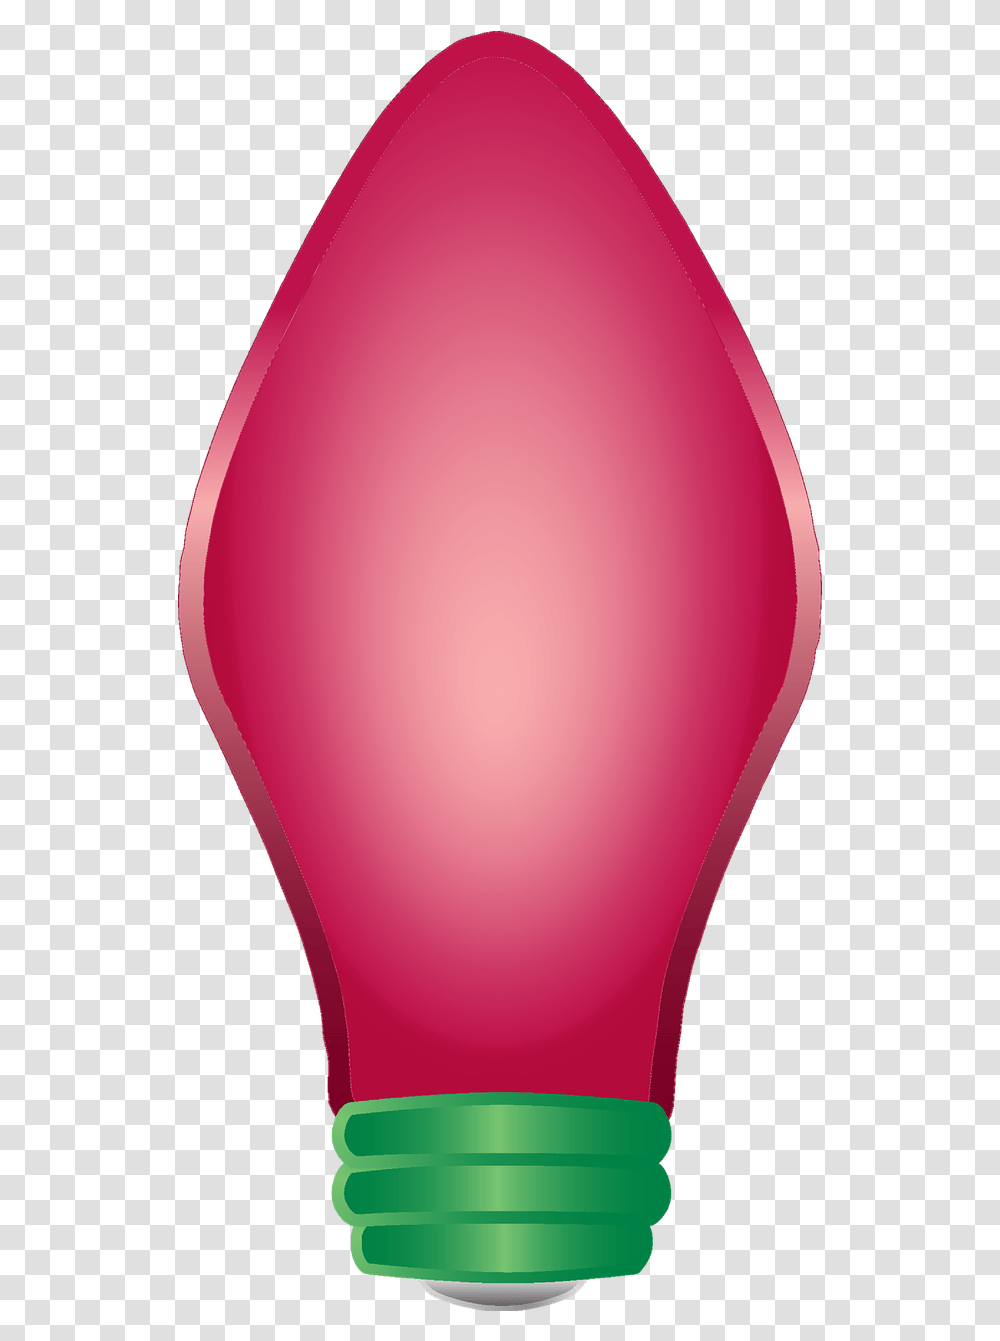 Graphic Christmas Light Bulb Free Vector Graphic On Pixabay Illustration, Balloon, Purple, Glass Transparent Png